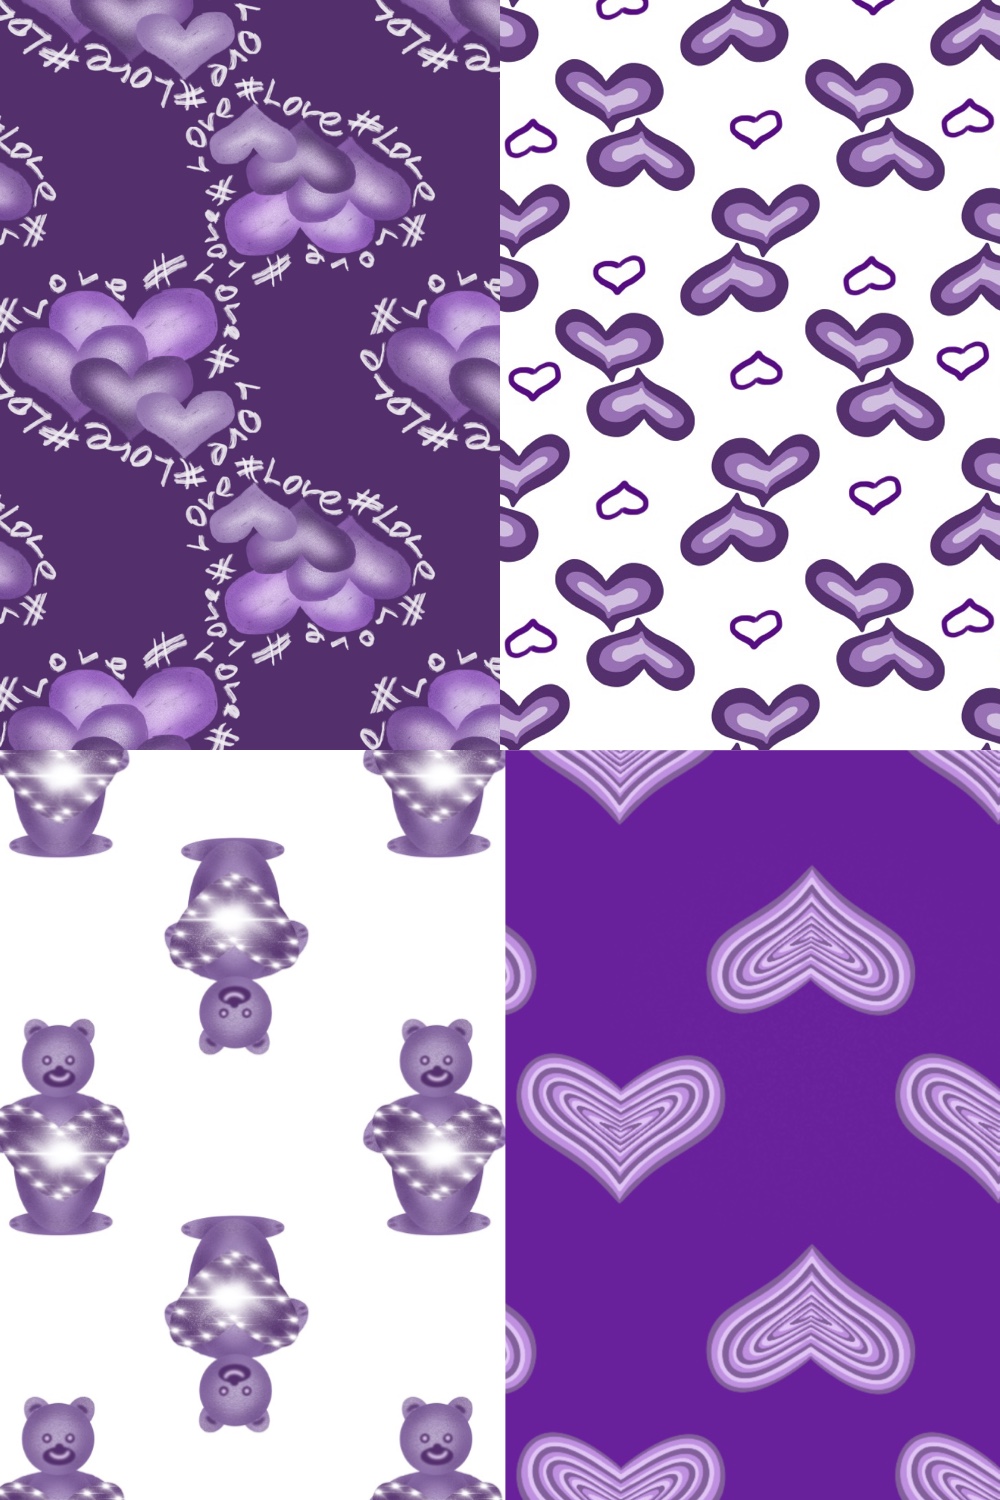 4 Love Seamless Patterns with Hearts.